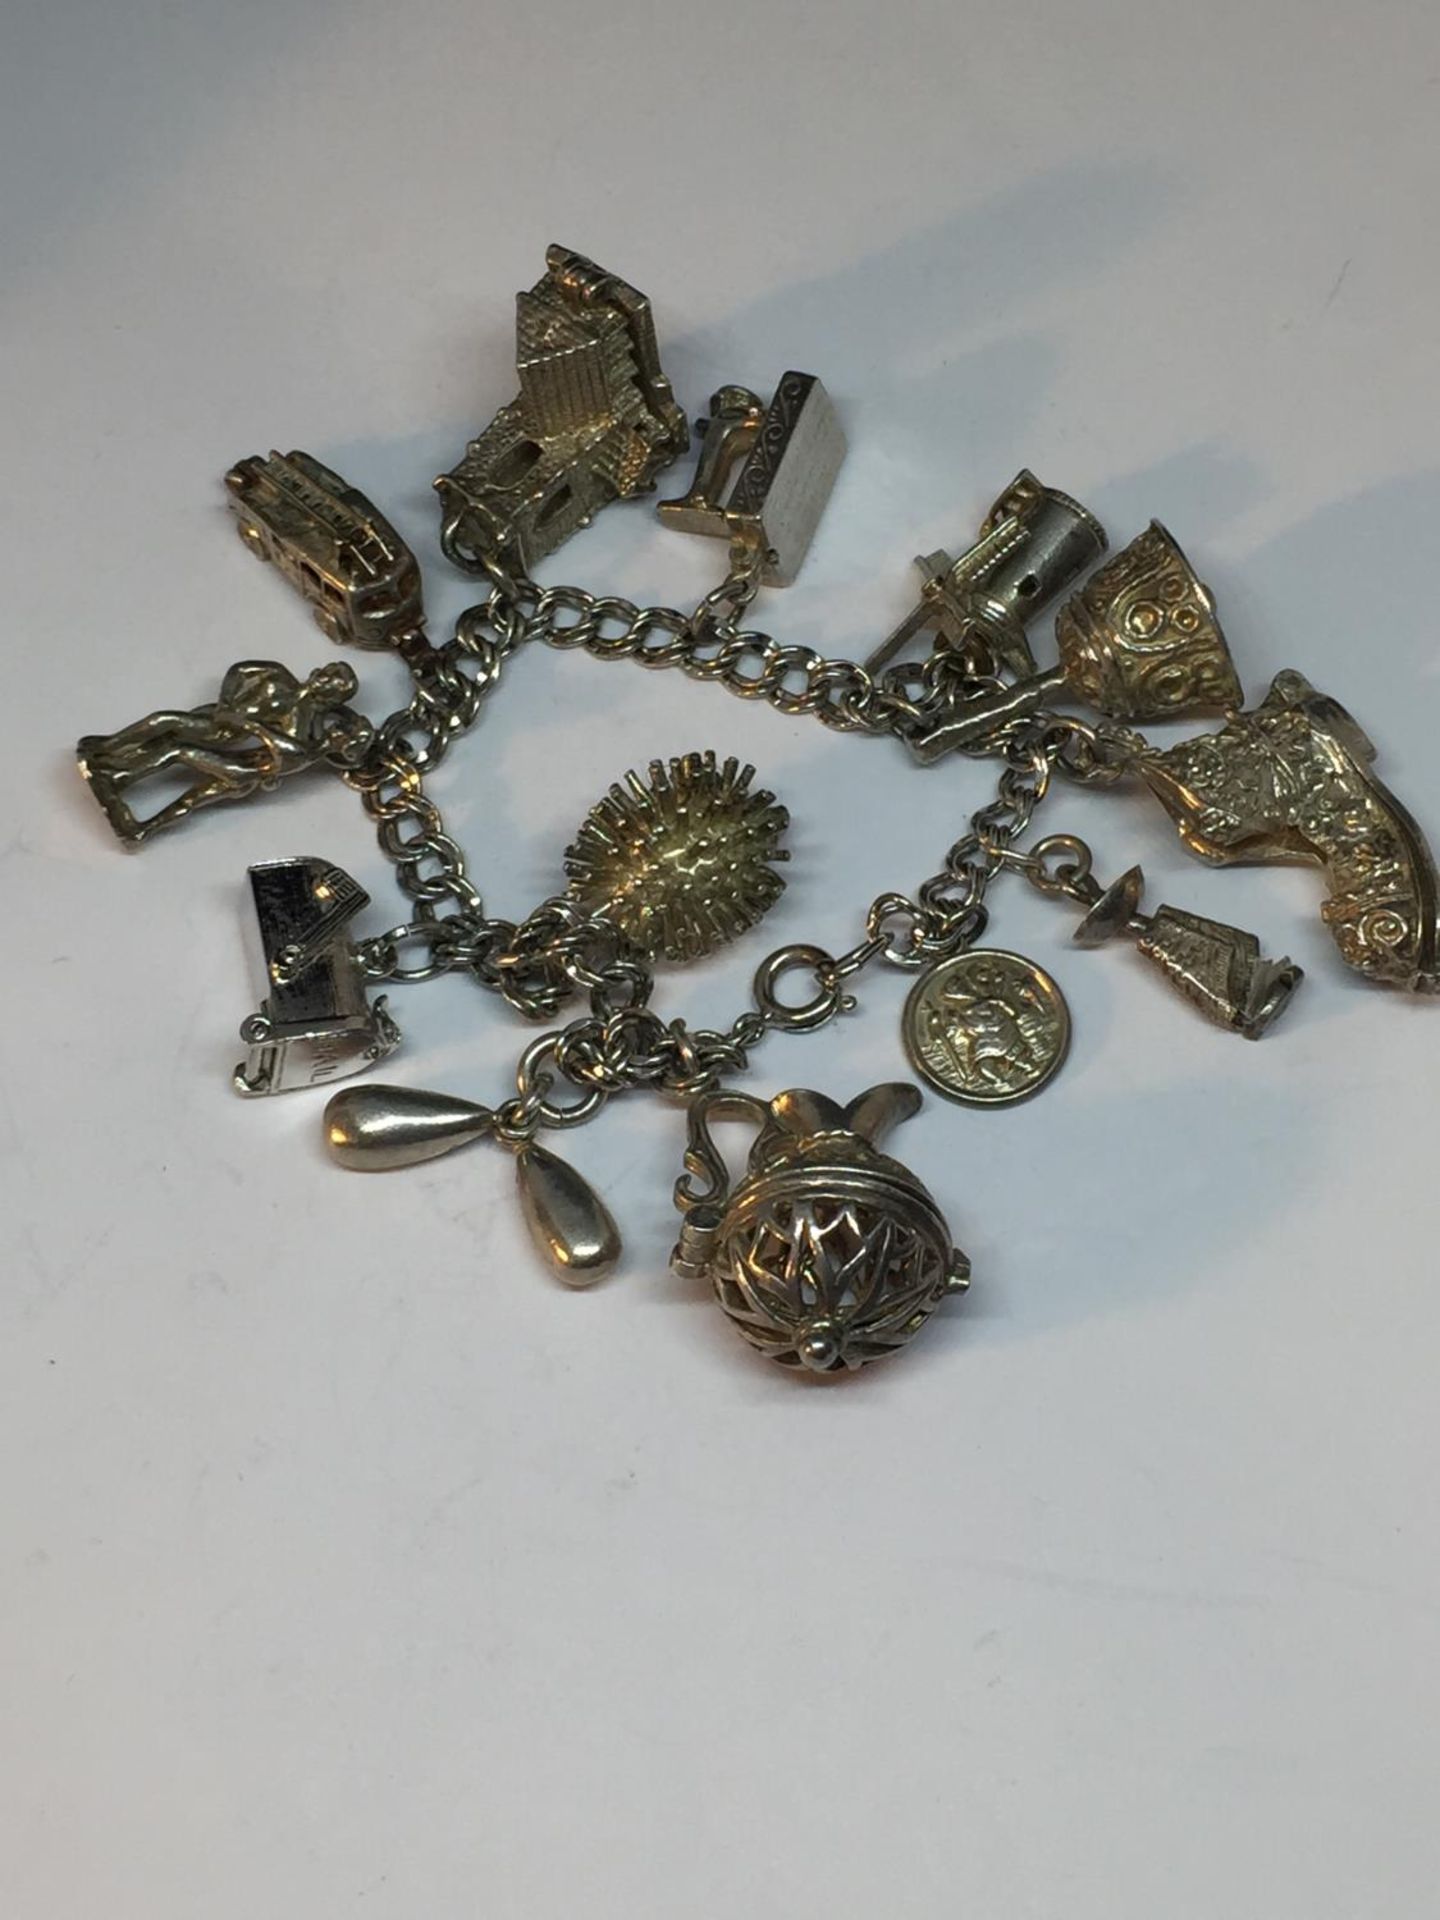 A SILVER CHARM BRACELET WITH 13 CHARMS